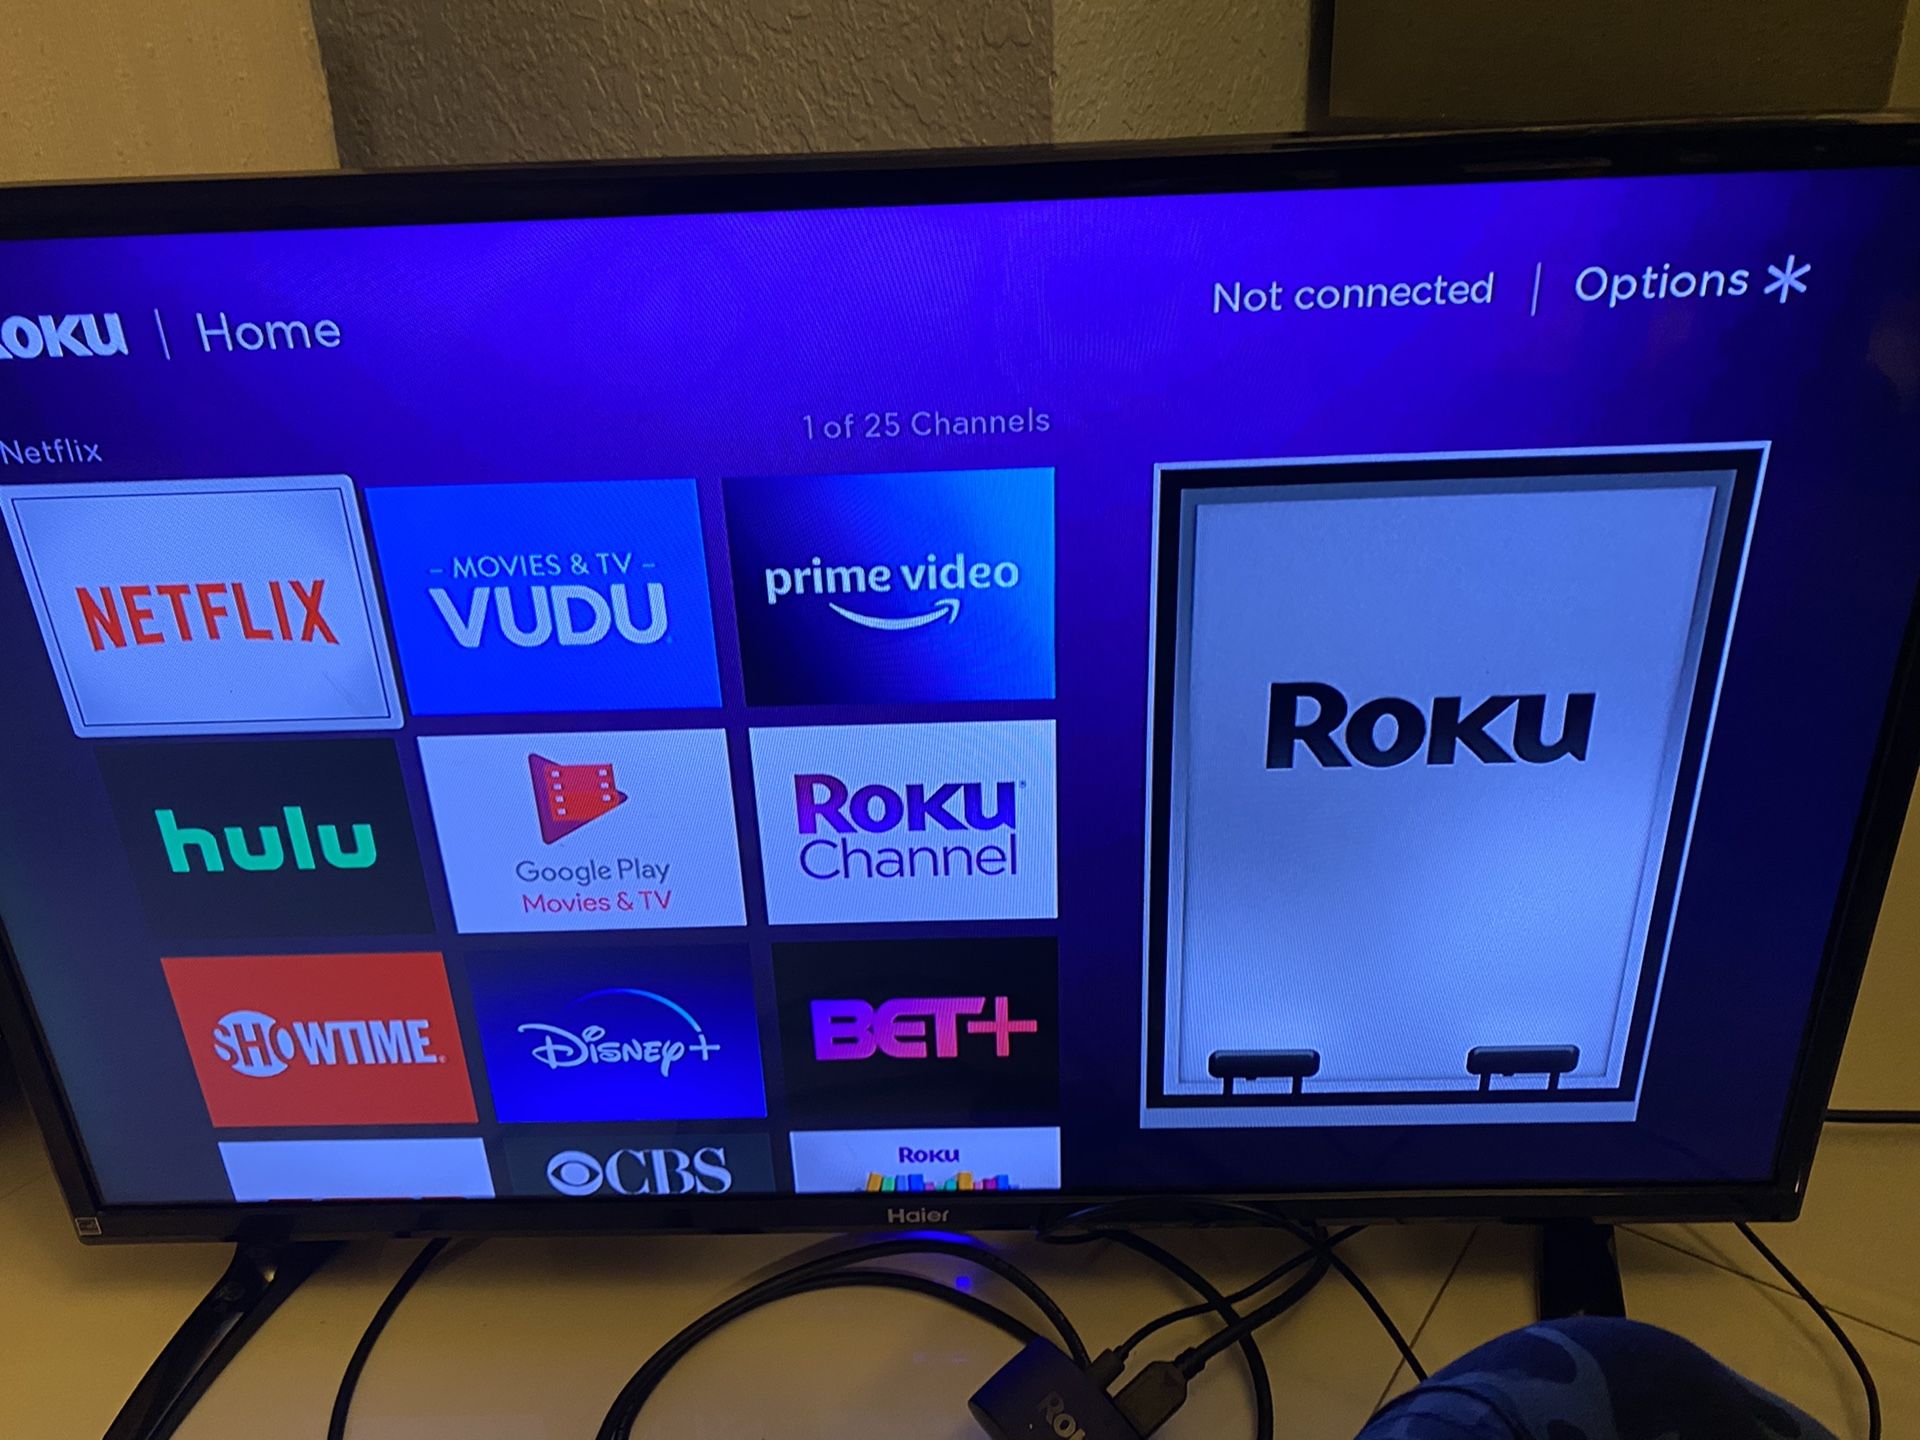 Hacer 32 with roku